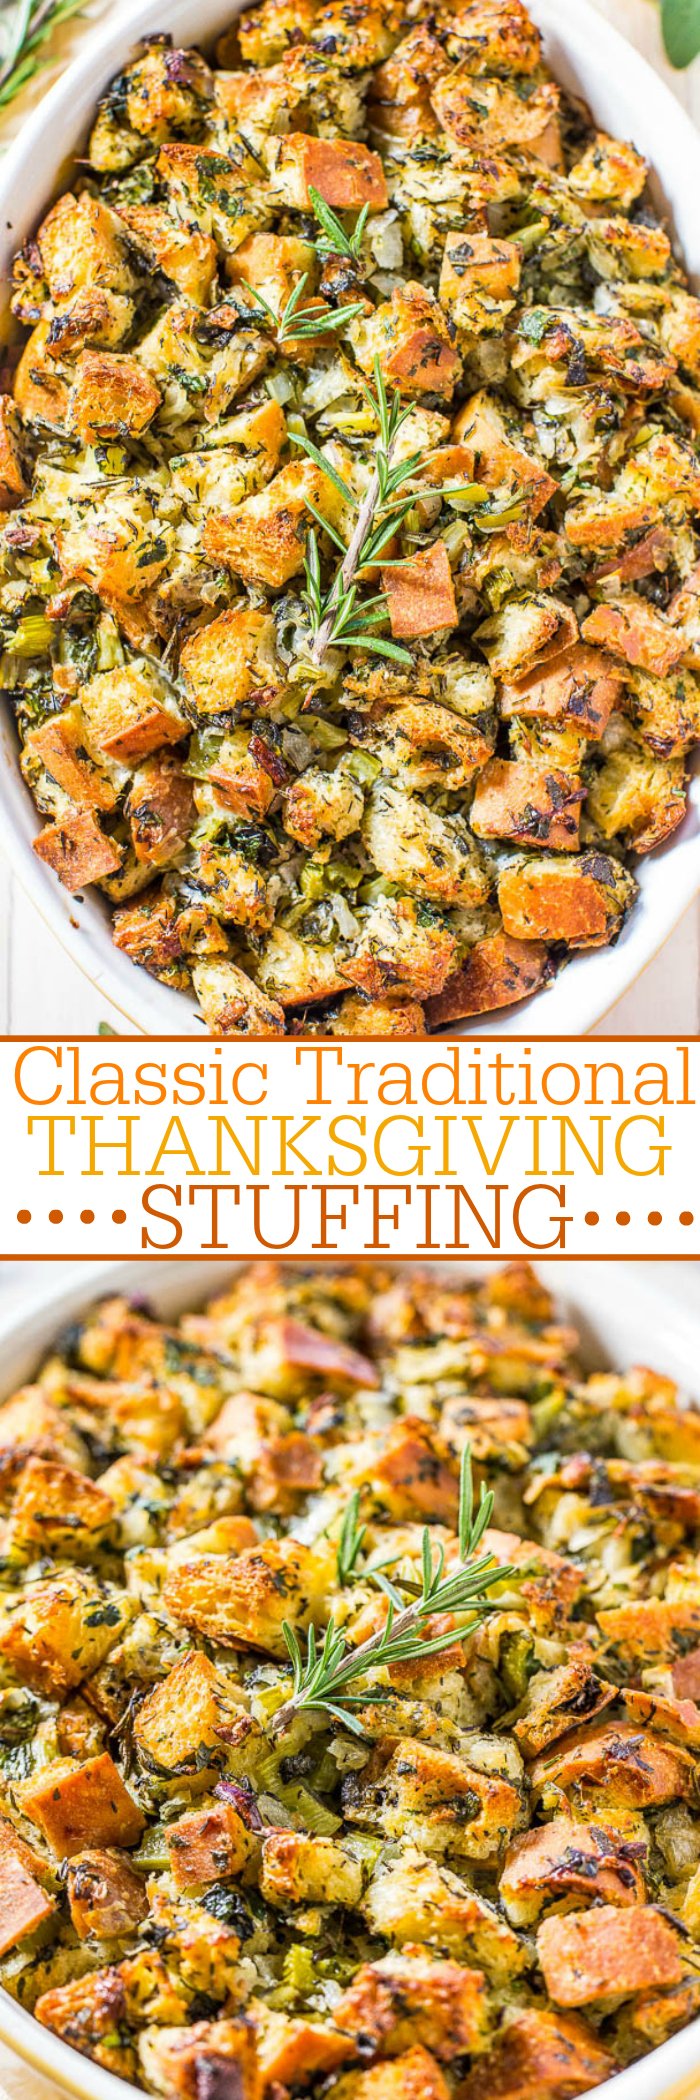 Classic Traditional Thanksgiving Stuffing Recipe — Nothing frilly or trendy. Classic, amazing, easy, homemade stuffing that everyone loves!! Simple ingredients with stellar results! It'll be your new go-to recipe!!